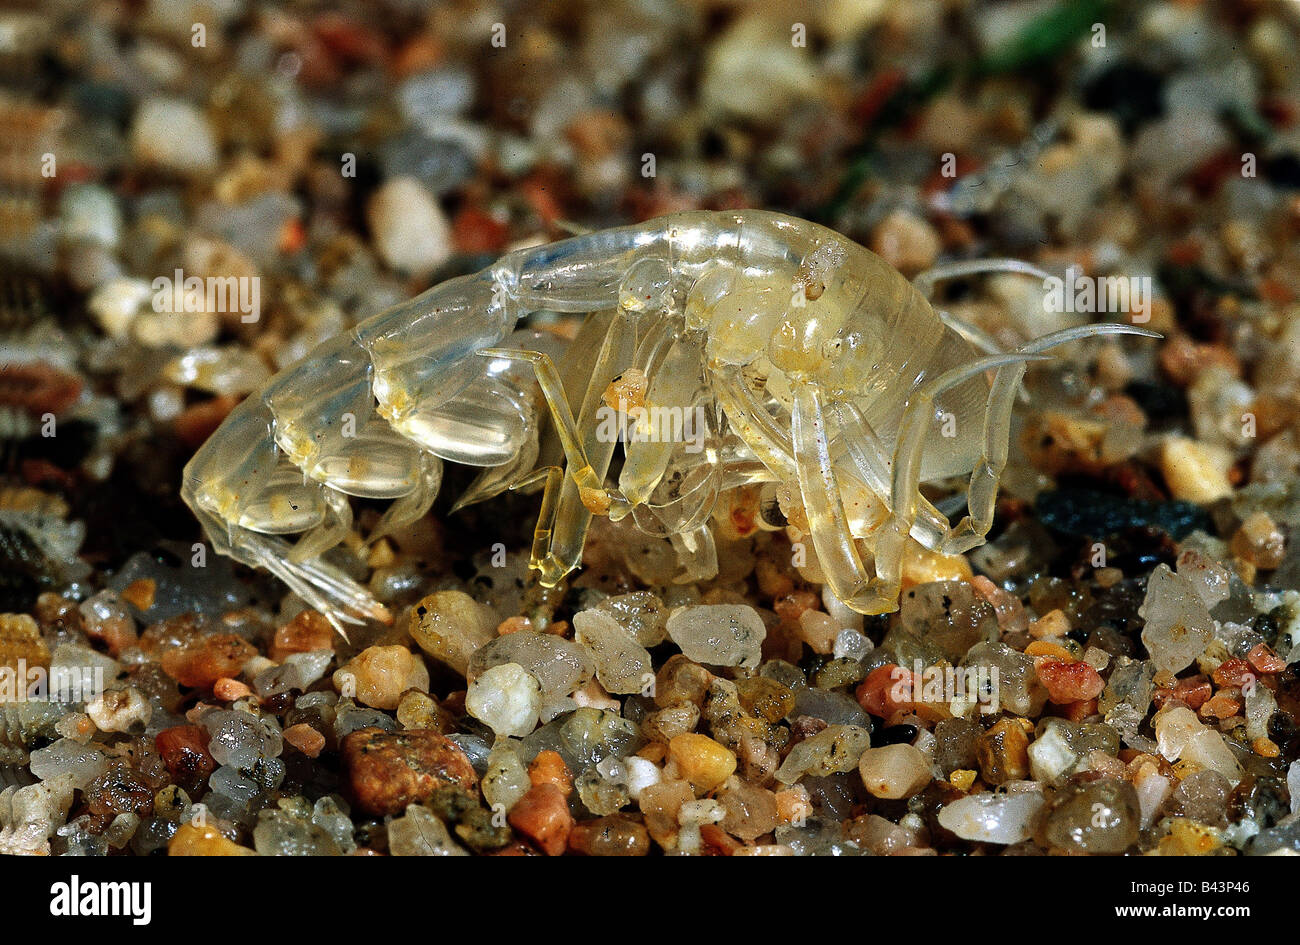 zoology / animals, shellfish / crustacean, Gammarus pulex, (Gammarus fossarum), on stones, distribution: Central Europe, Additional-Rights-Clearance-Info-Not-Available Stock Photo